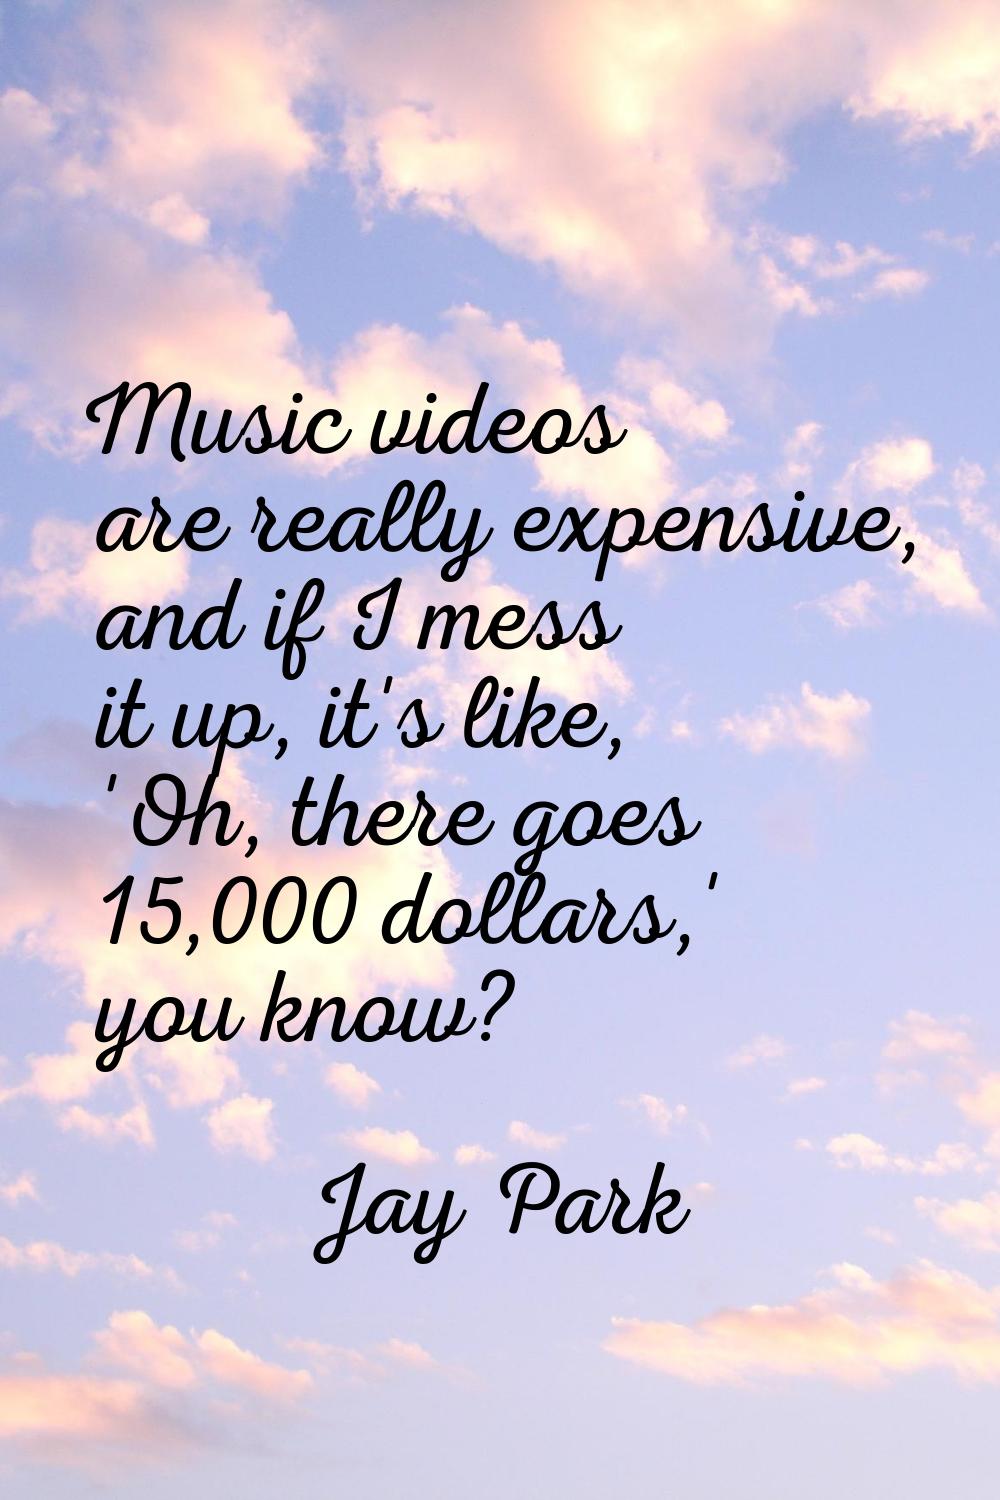 Music videos are really expensive, and if I mess it up, it's like, 'Oh, there goes 15,000 dollars,'